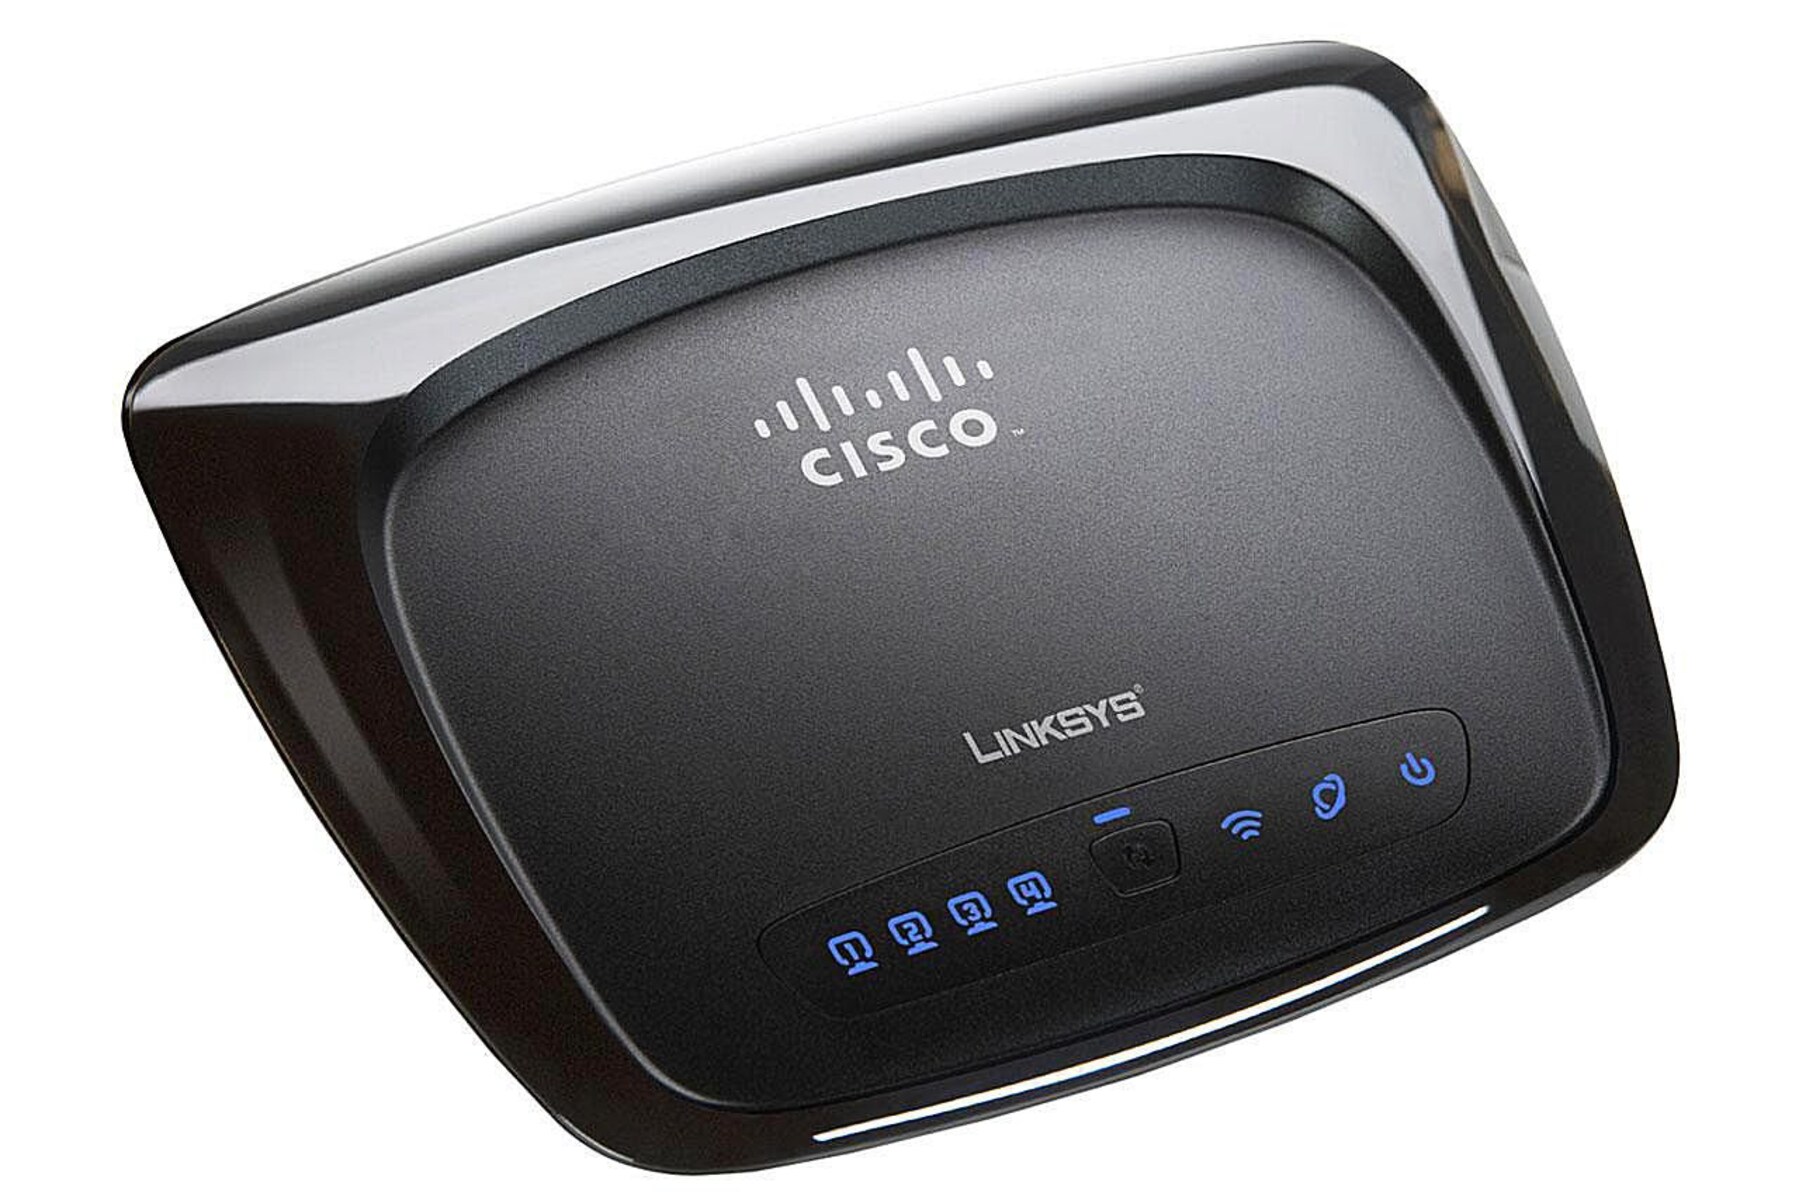 How To Change The Password On A Cisco Wireless Router